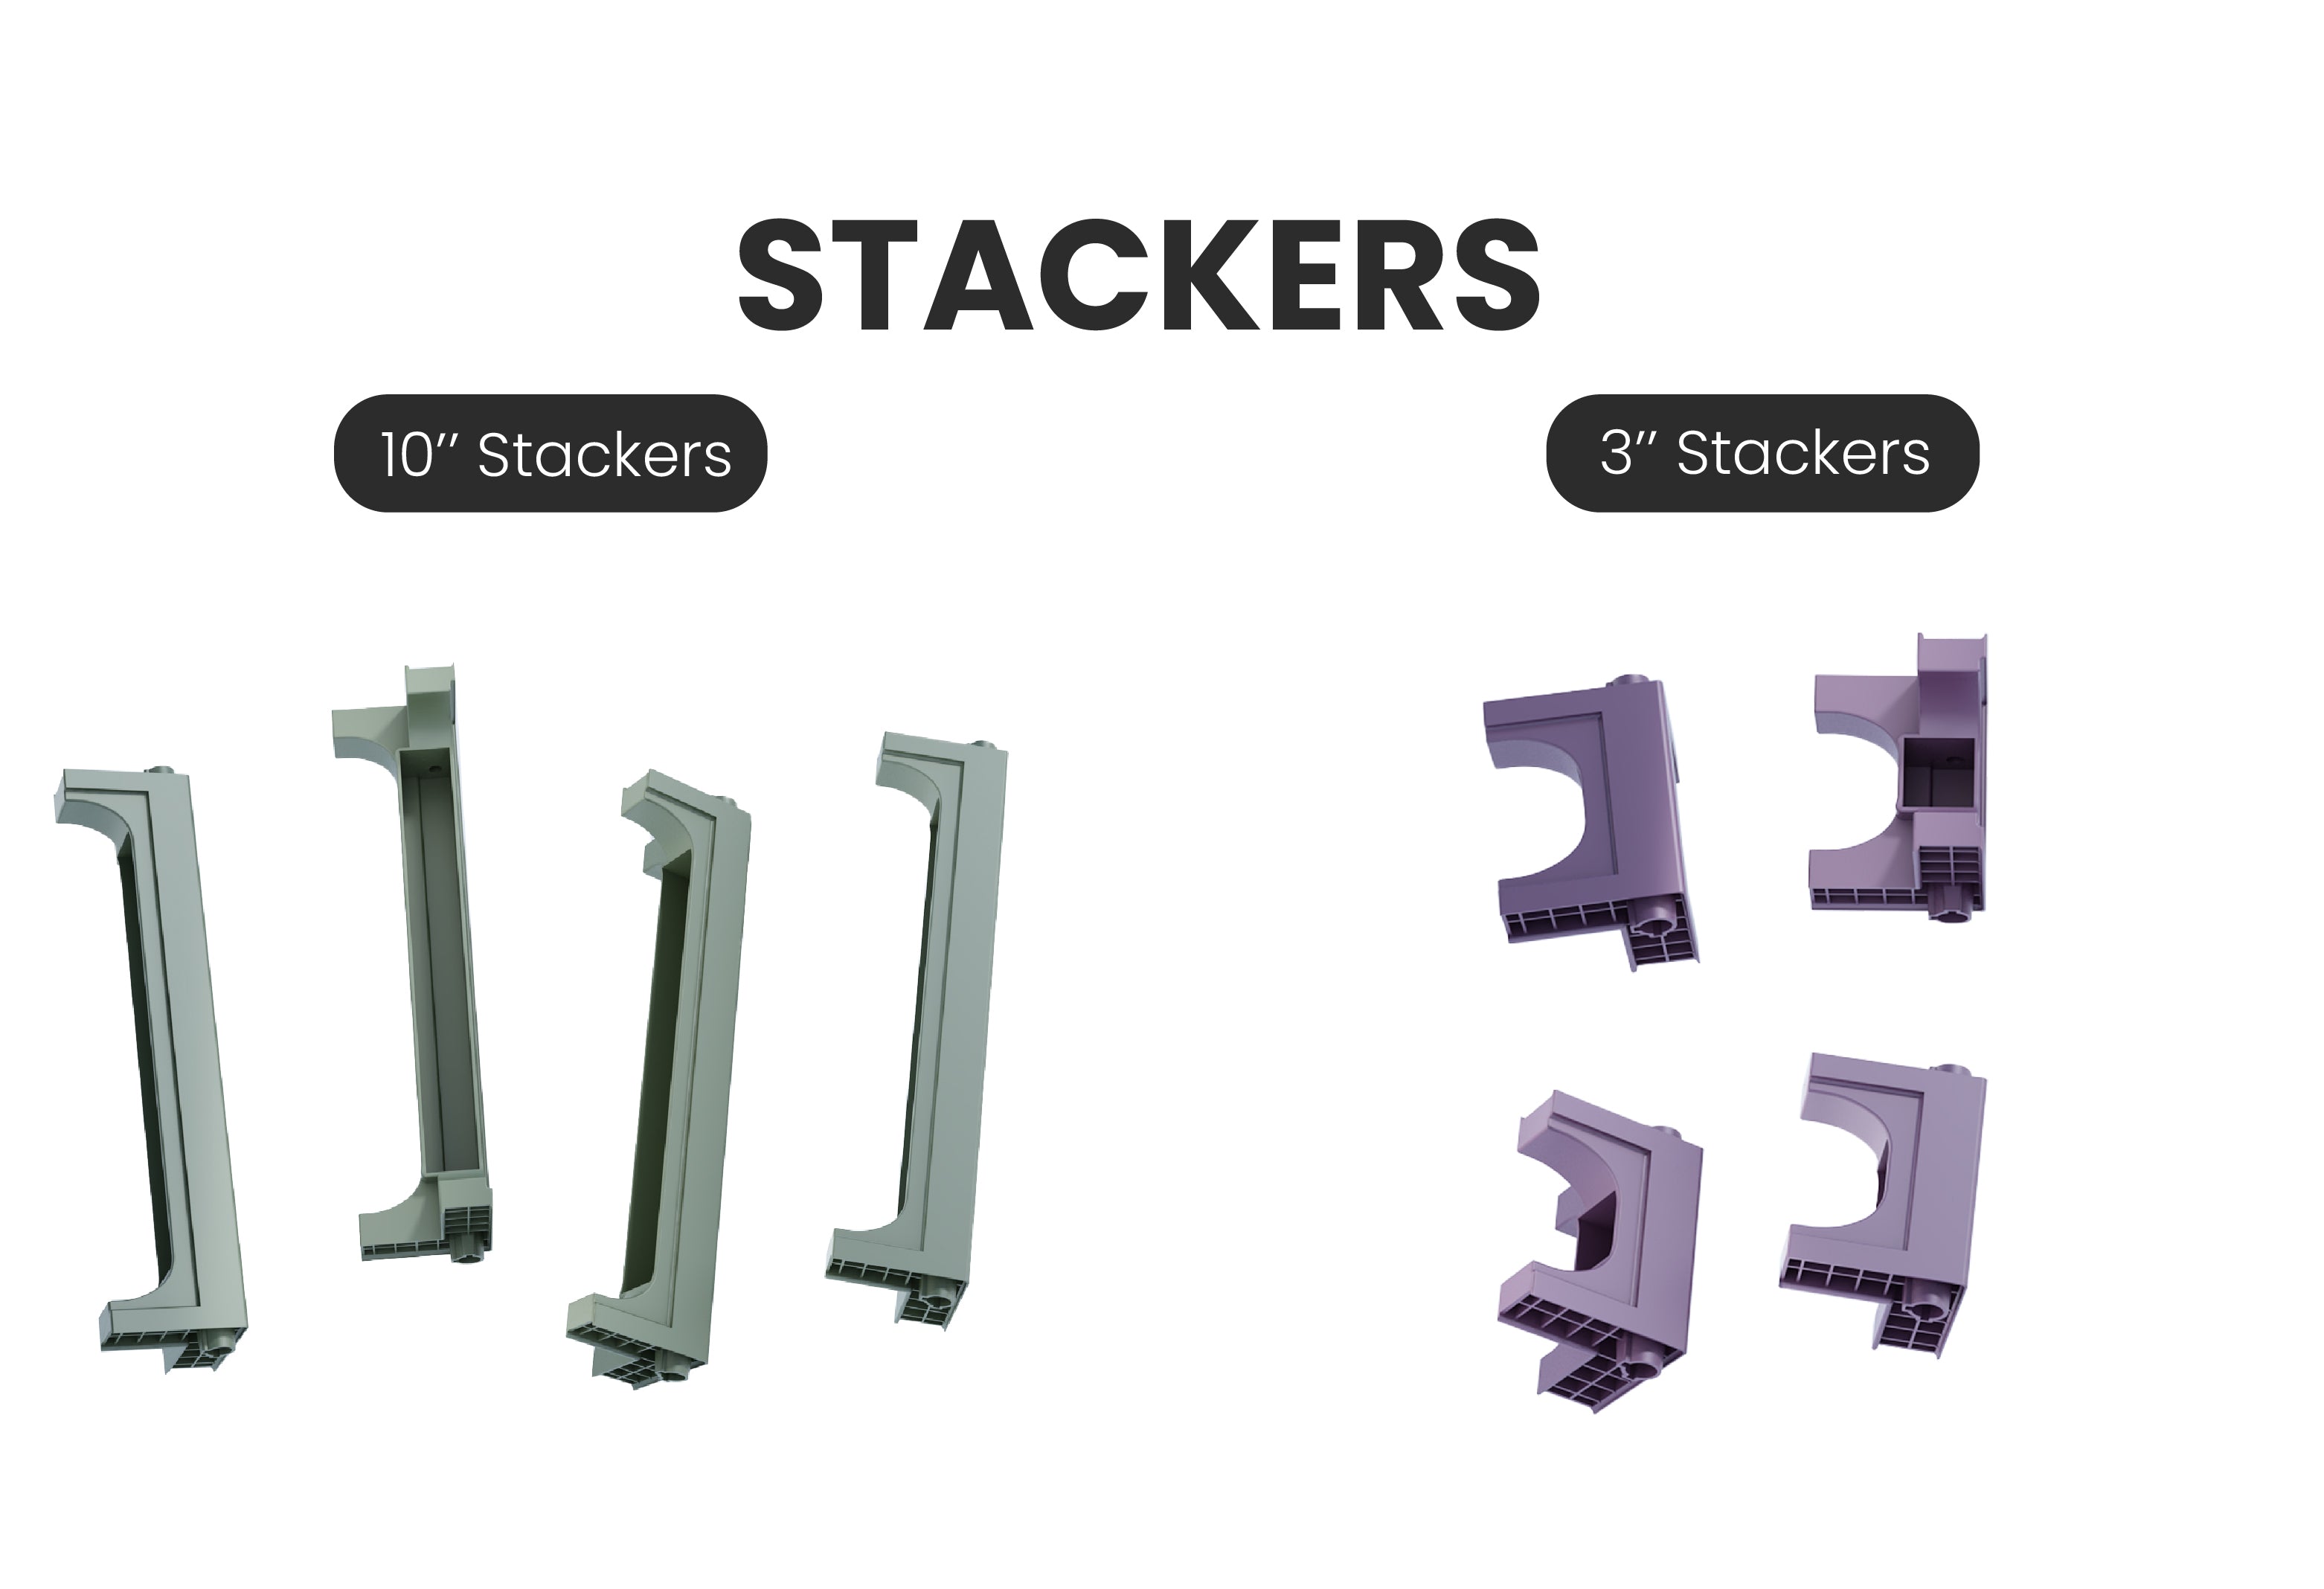 Phailozoo stackers 10'' and 3'' stackers in 3 colors